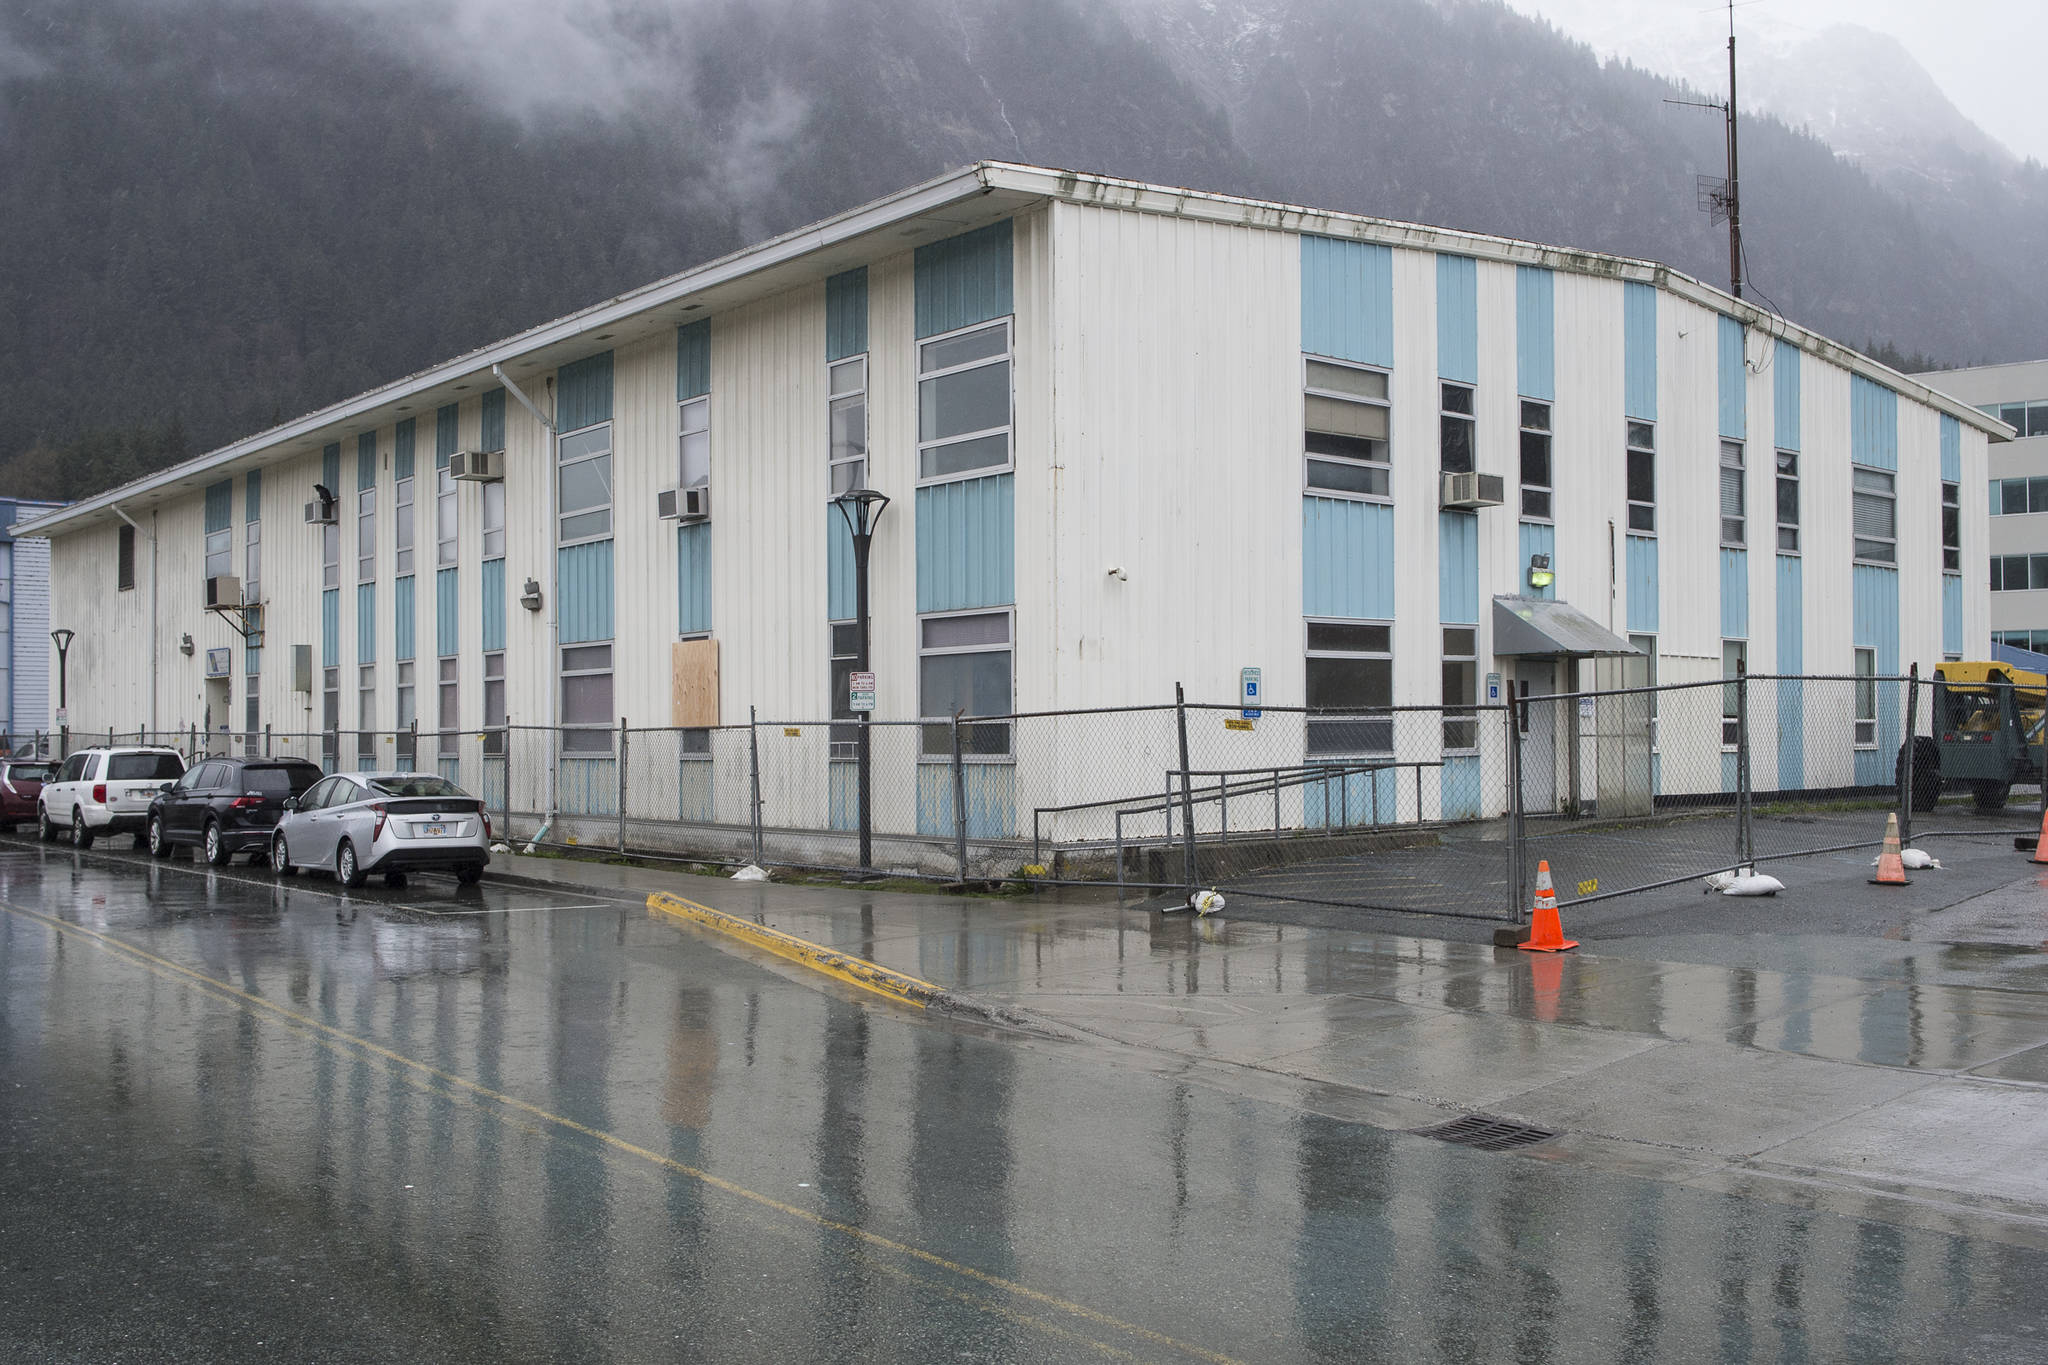 The former Public Safety Building has been fenced off for demolition on Thursday, April 18, 2019. (Michael Penn | Juneau Empire)